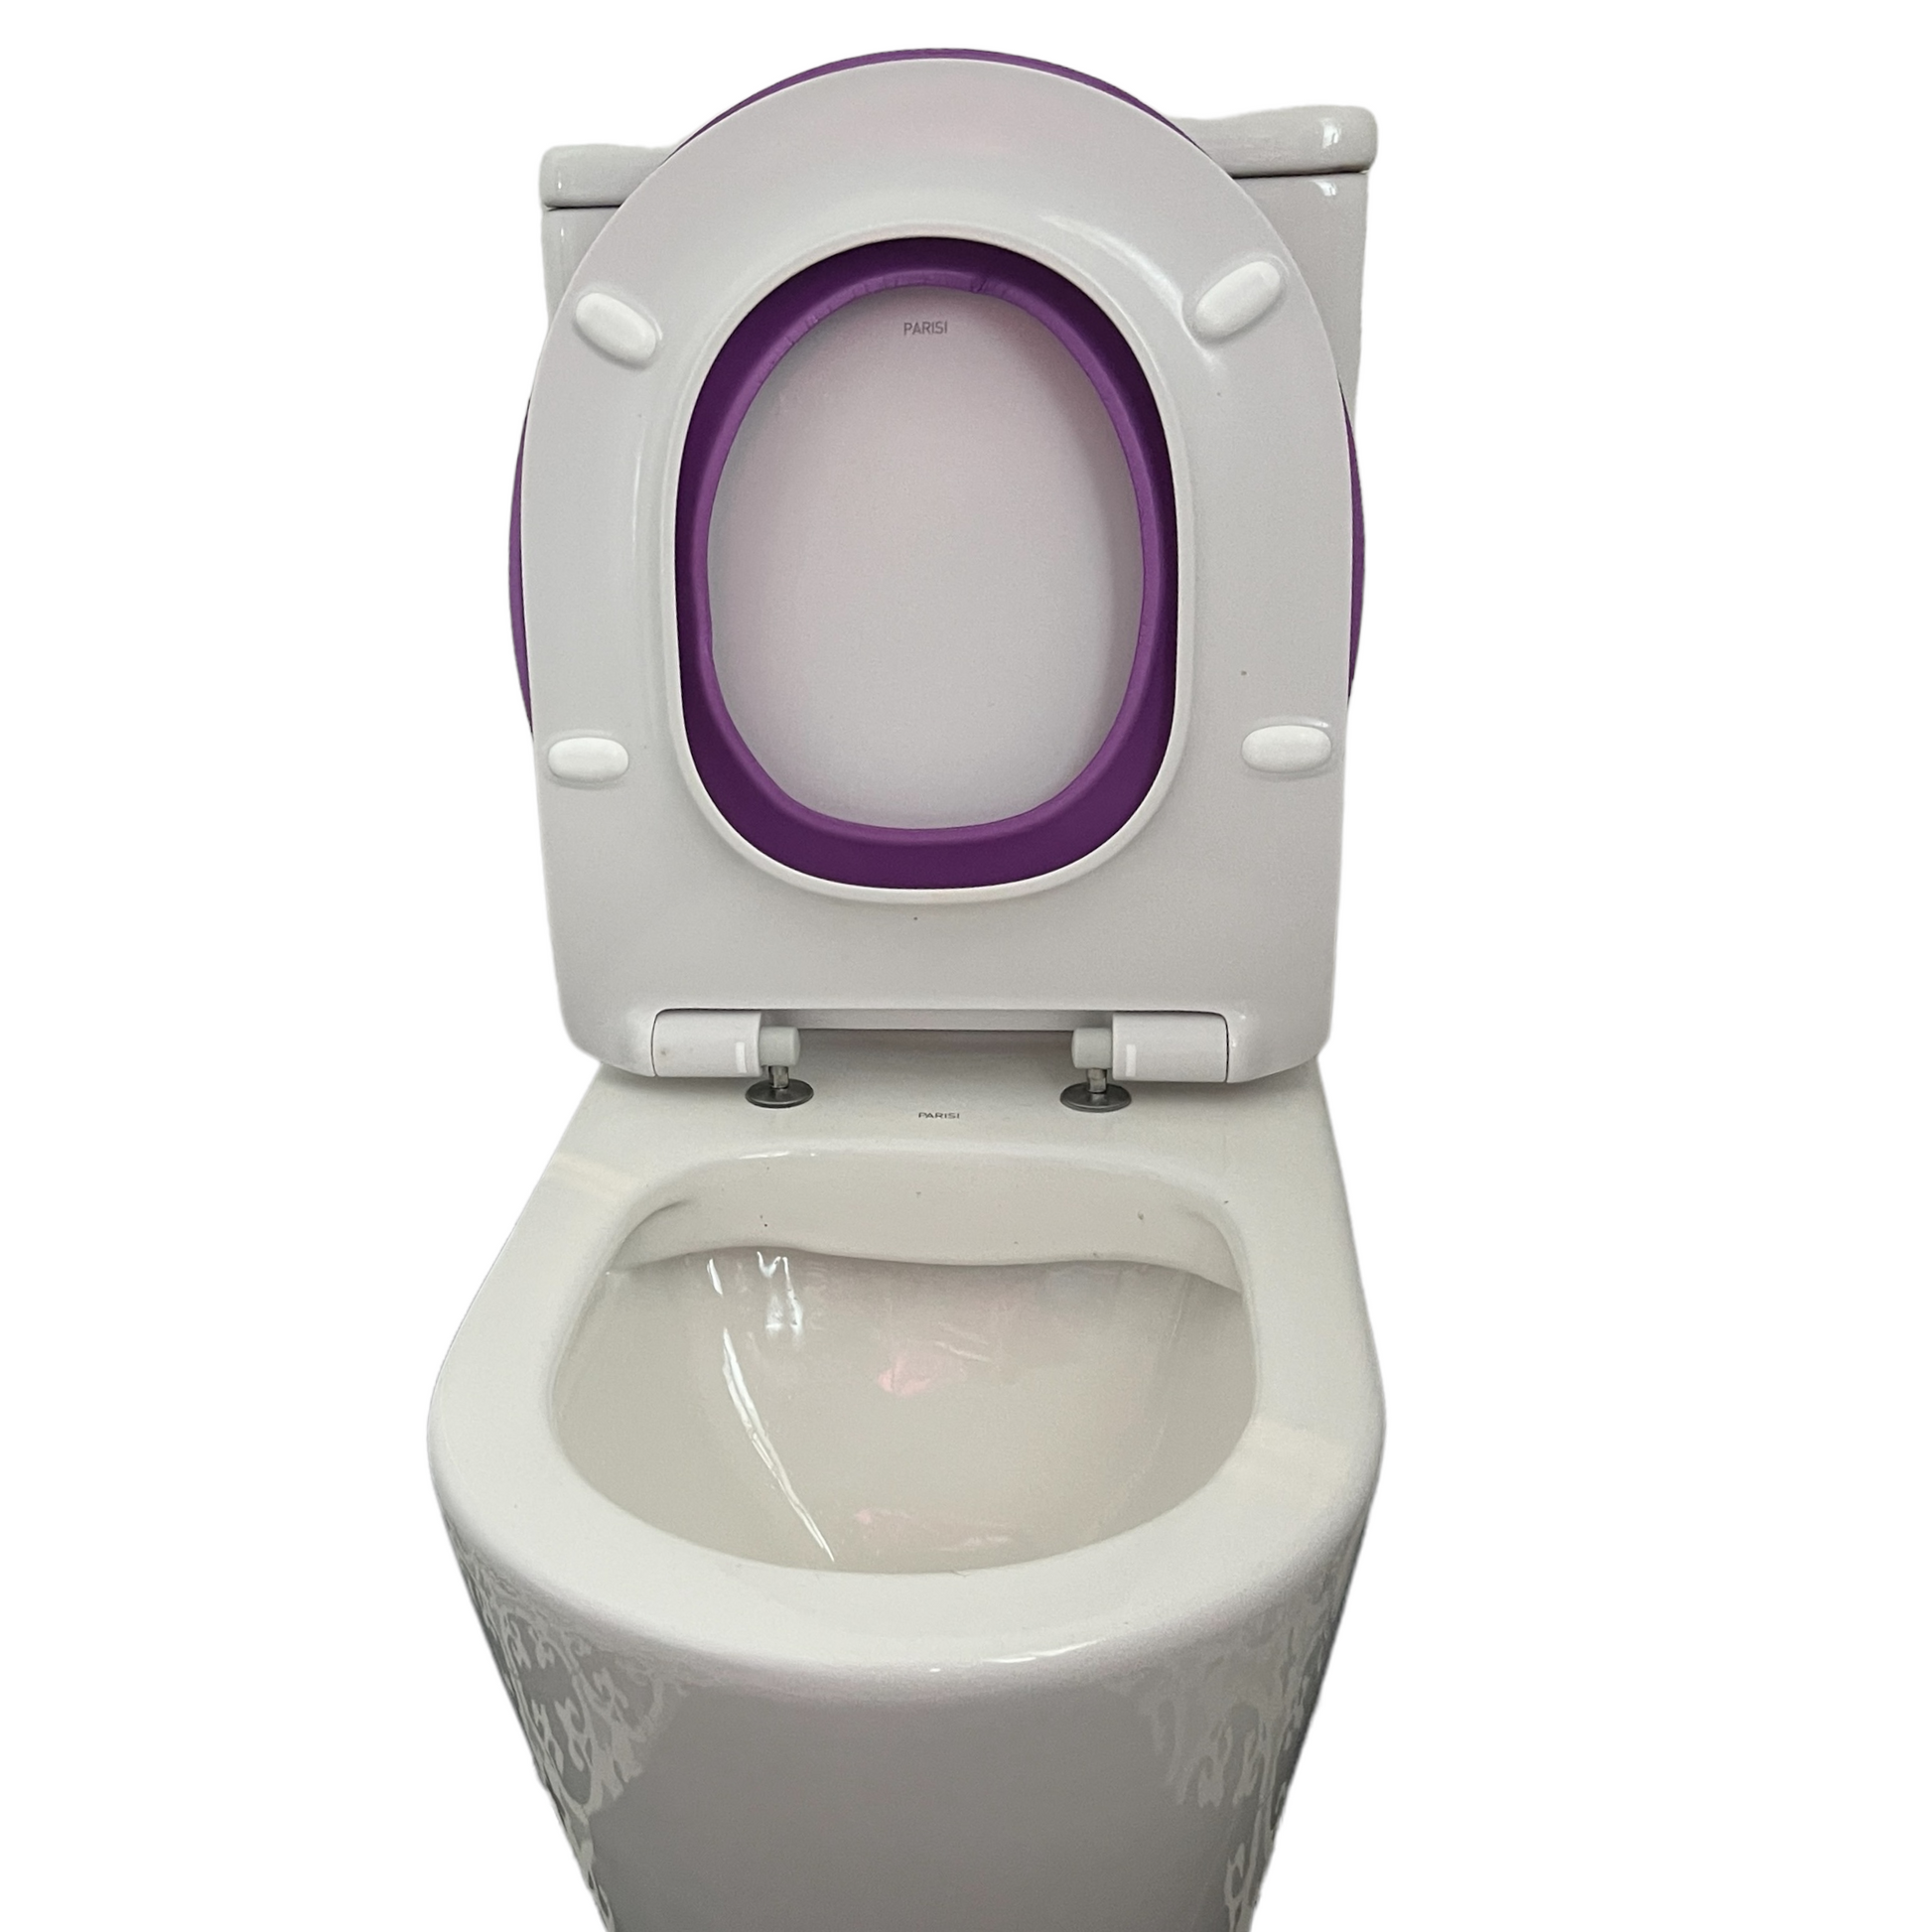 Padded Toilet Seat Identifying Cover Toilet Seat Covers SPIRIT SPARKPLUGS   